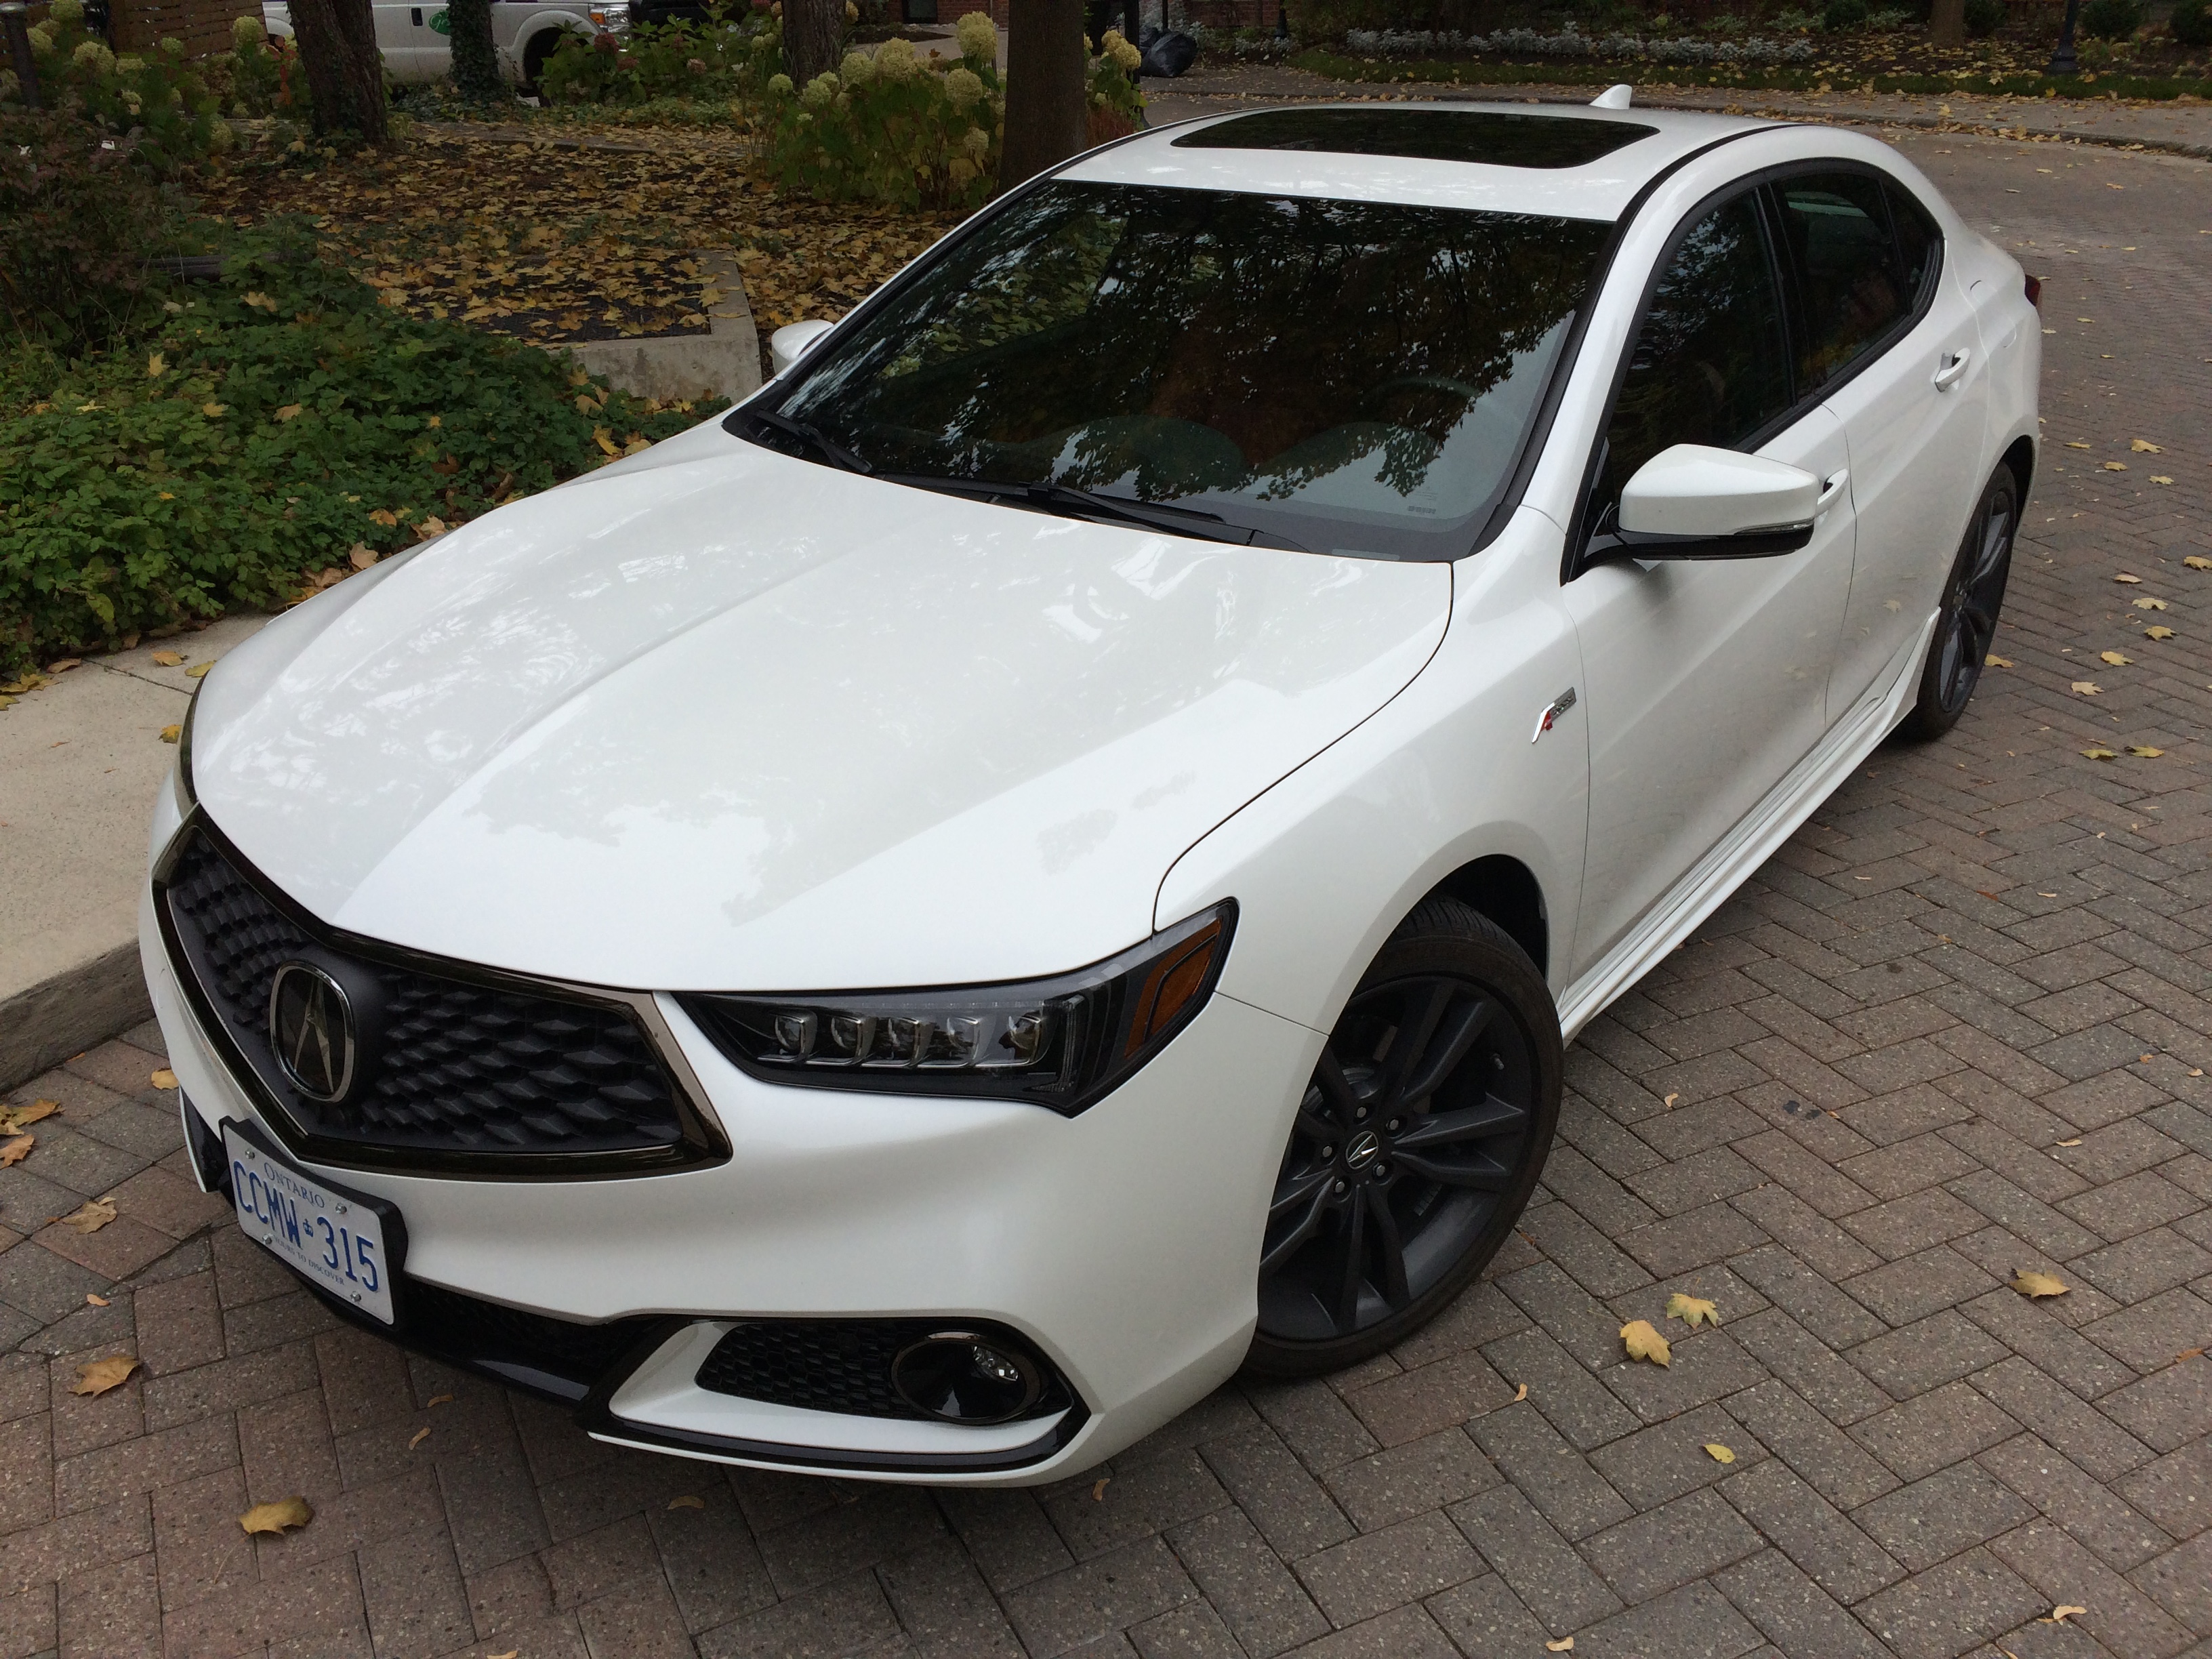 Acura ILX exterior restyling